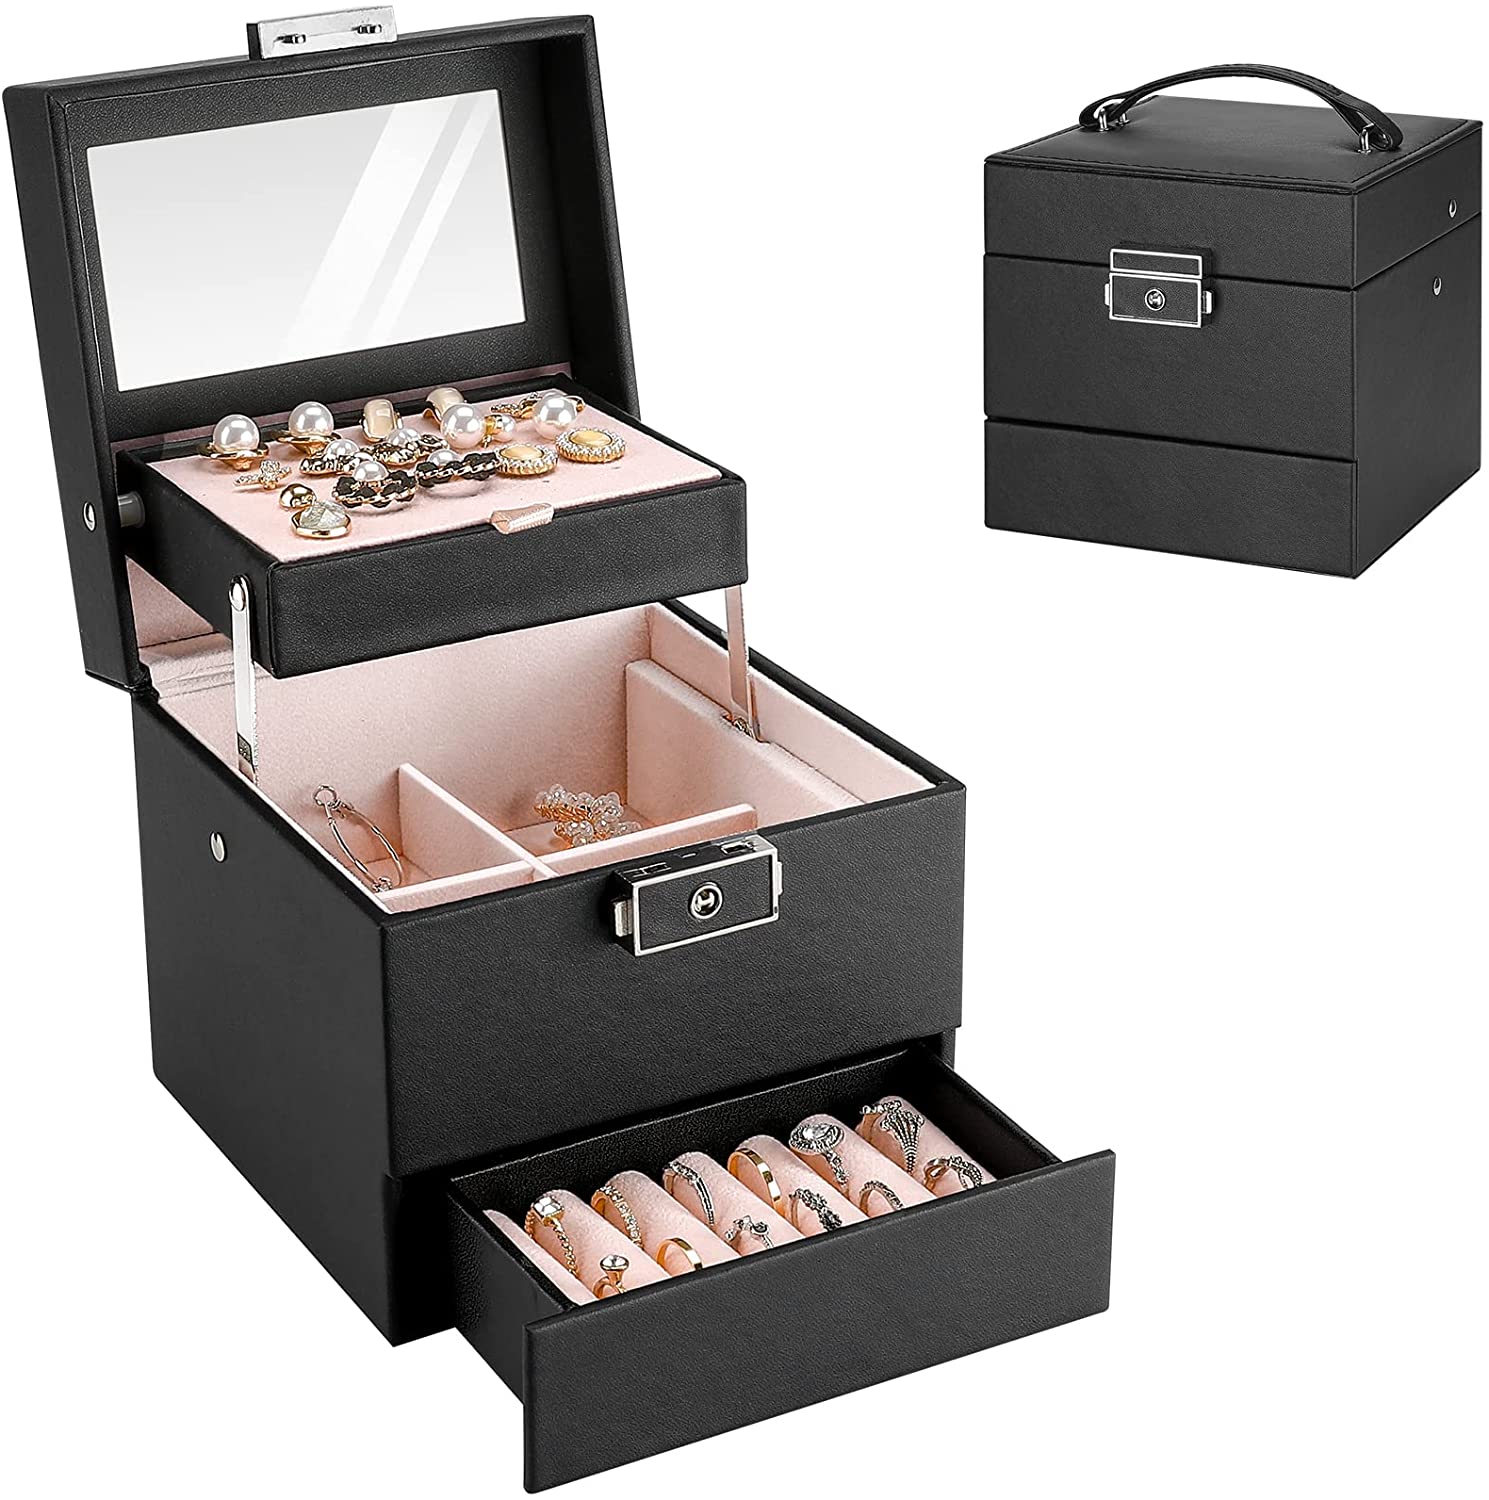 ProCase Jewelry Box Organizer for Women Girls, Two Layer Jewelry Display Storage Holder Case for Necklace Earrings Bracelets Rings Watches, Ideal